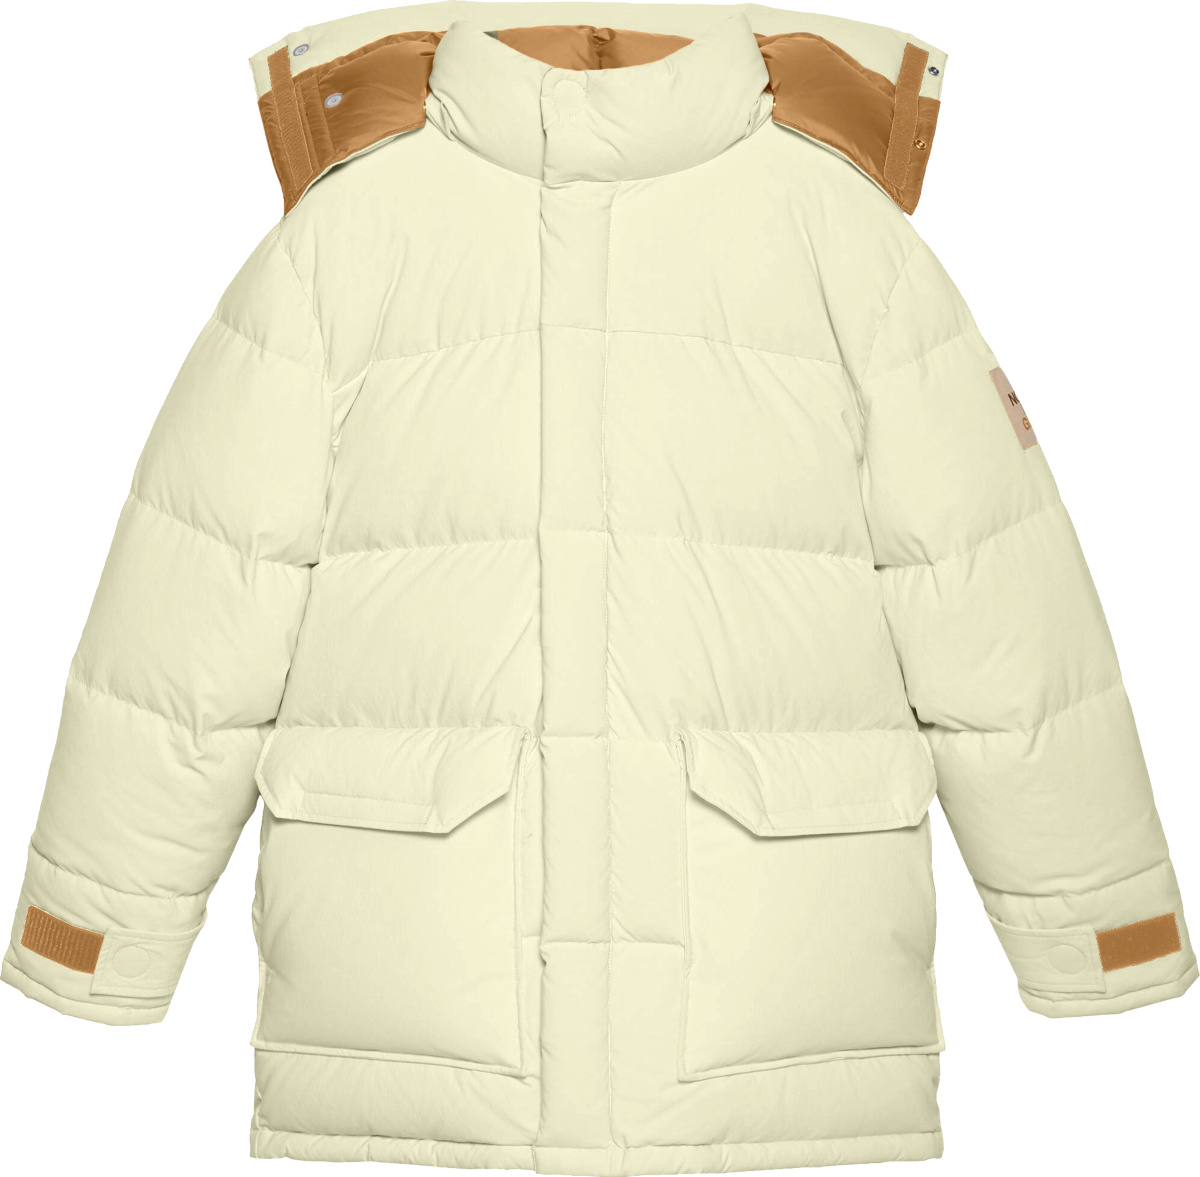 Gucci X The North Face Ivory Puffer Jacket Incorporated Style